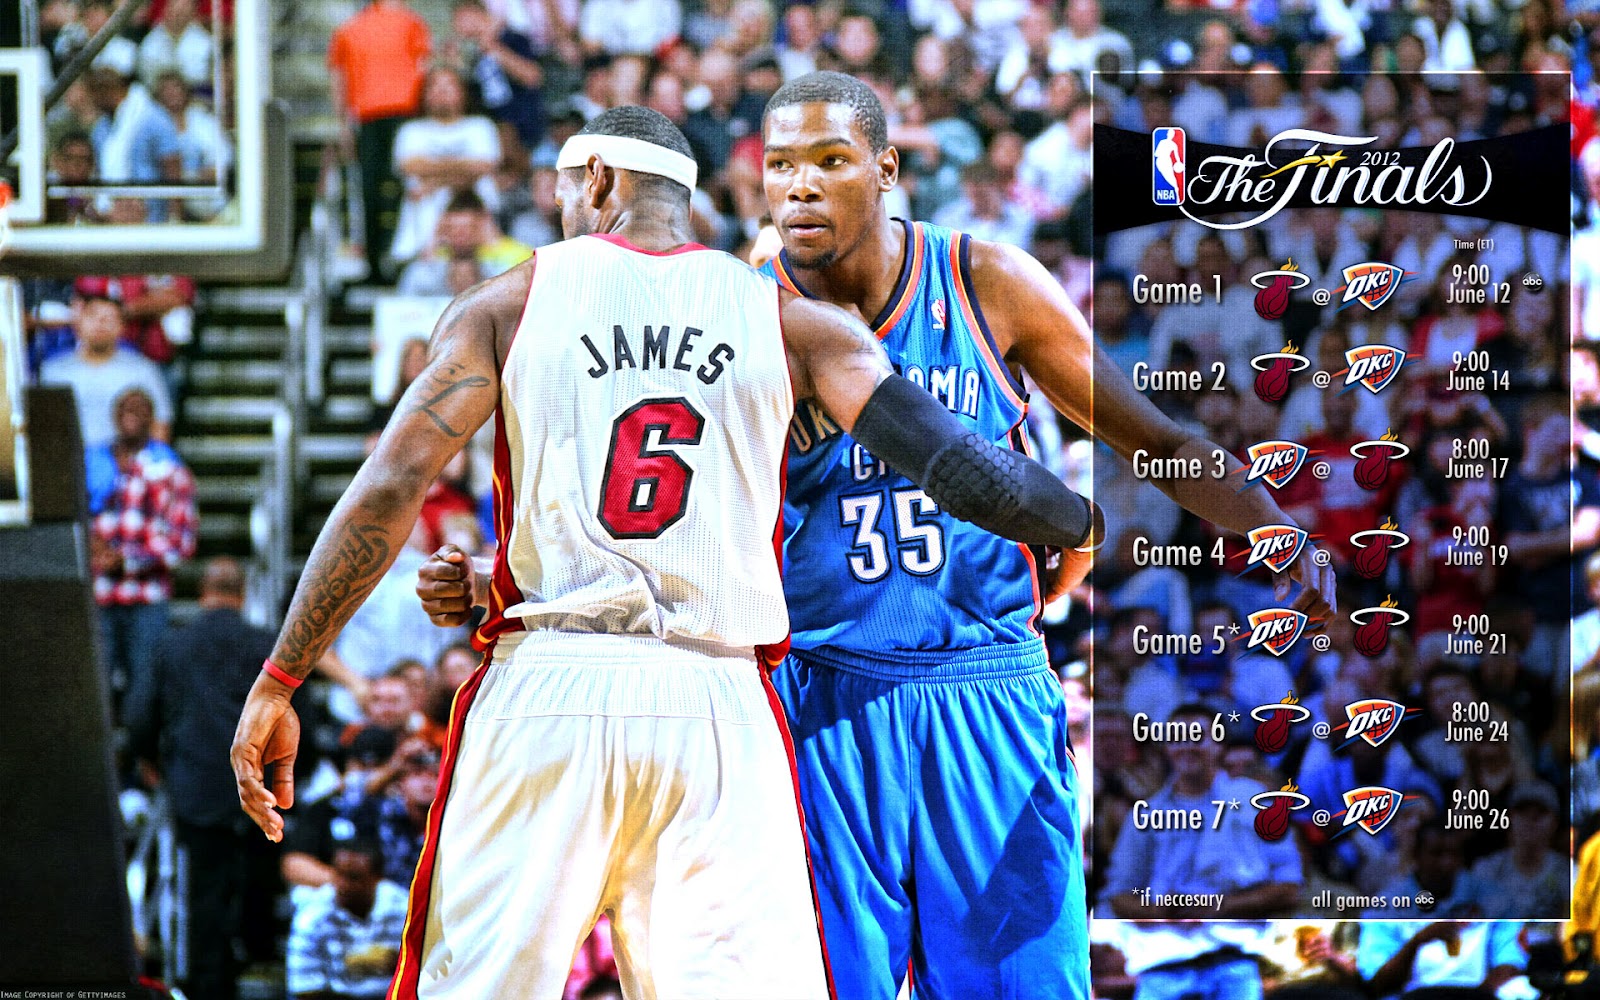 Widescreen Wallpaper Of Lebron James And Kevin Durant With Schedule